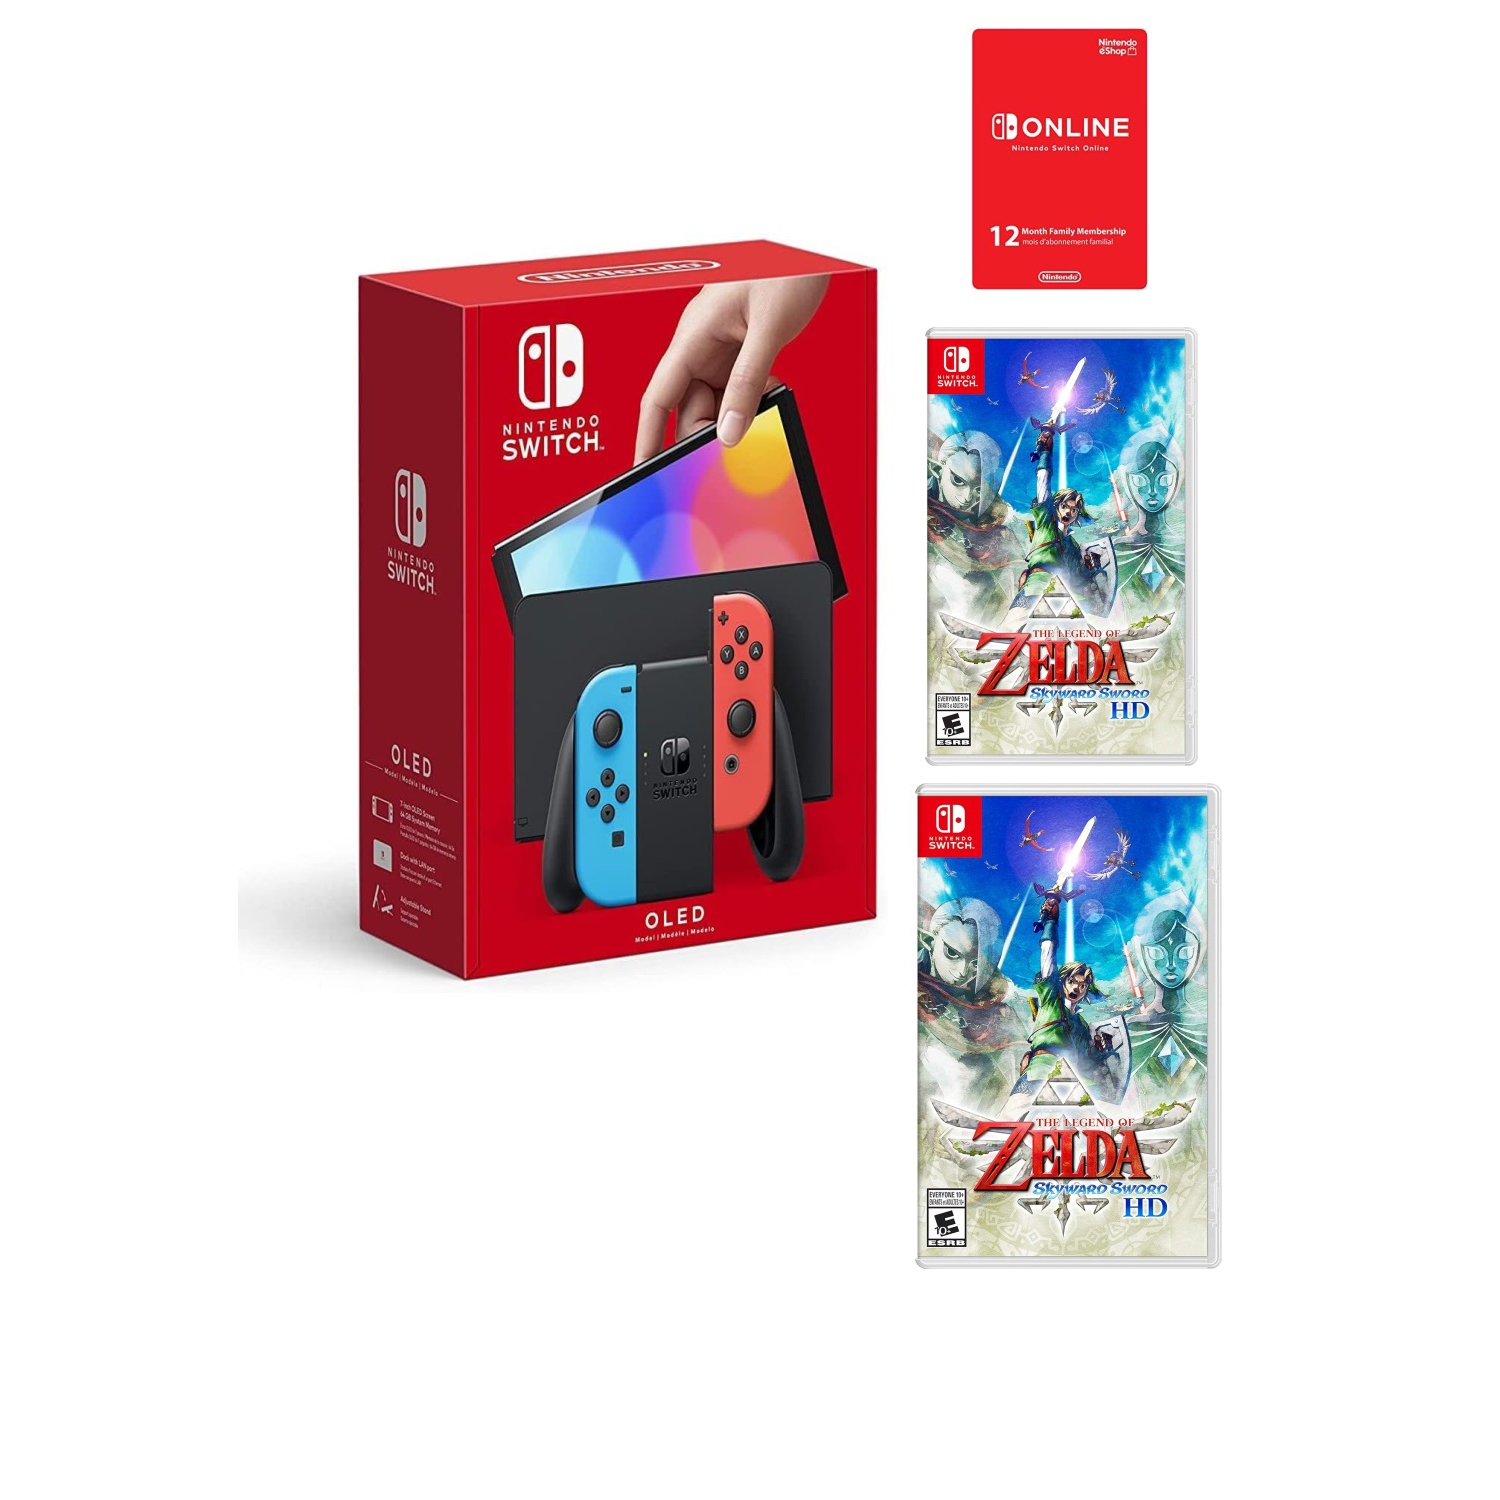 Nintendo Switch Console with Neon Blue and Red Joy-Con - OLED Model (Japan Spec) bundled with Super Smash Bros. Ultimate, The Legend of Zelda Skyward Sword, & 12 Month Subscription